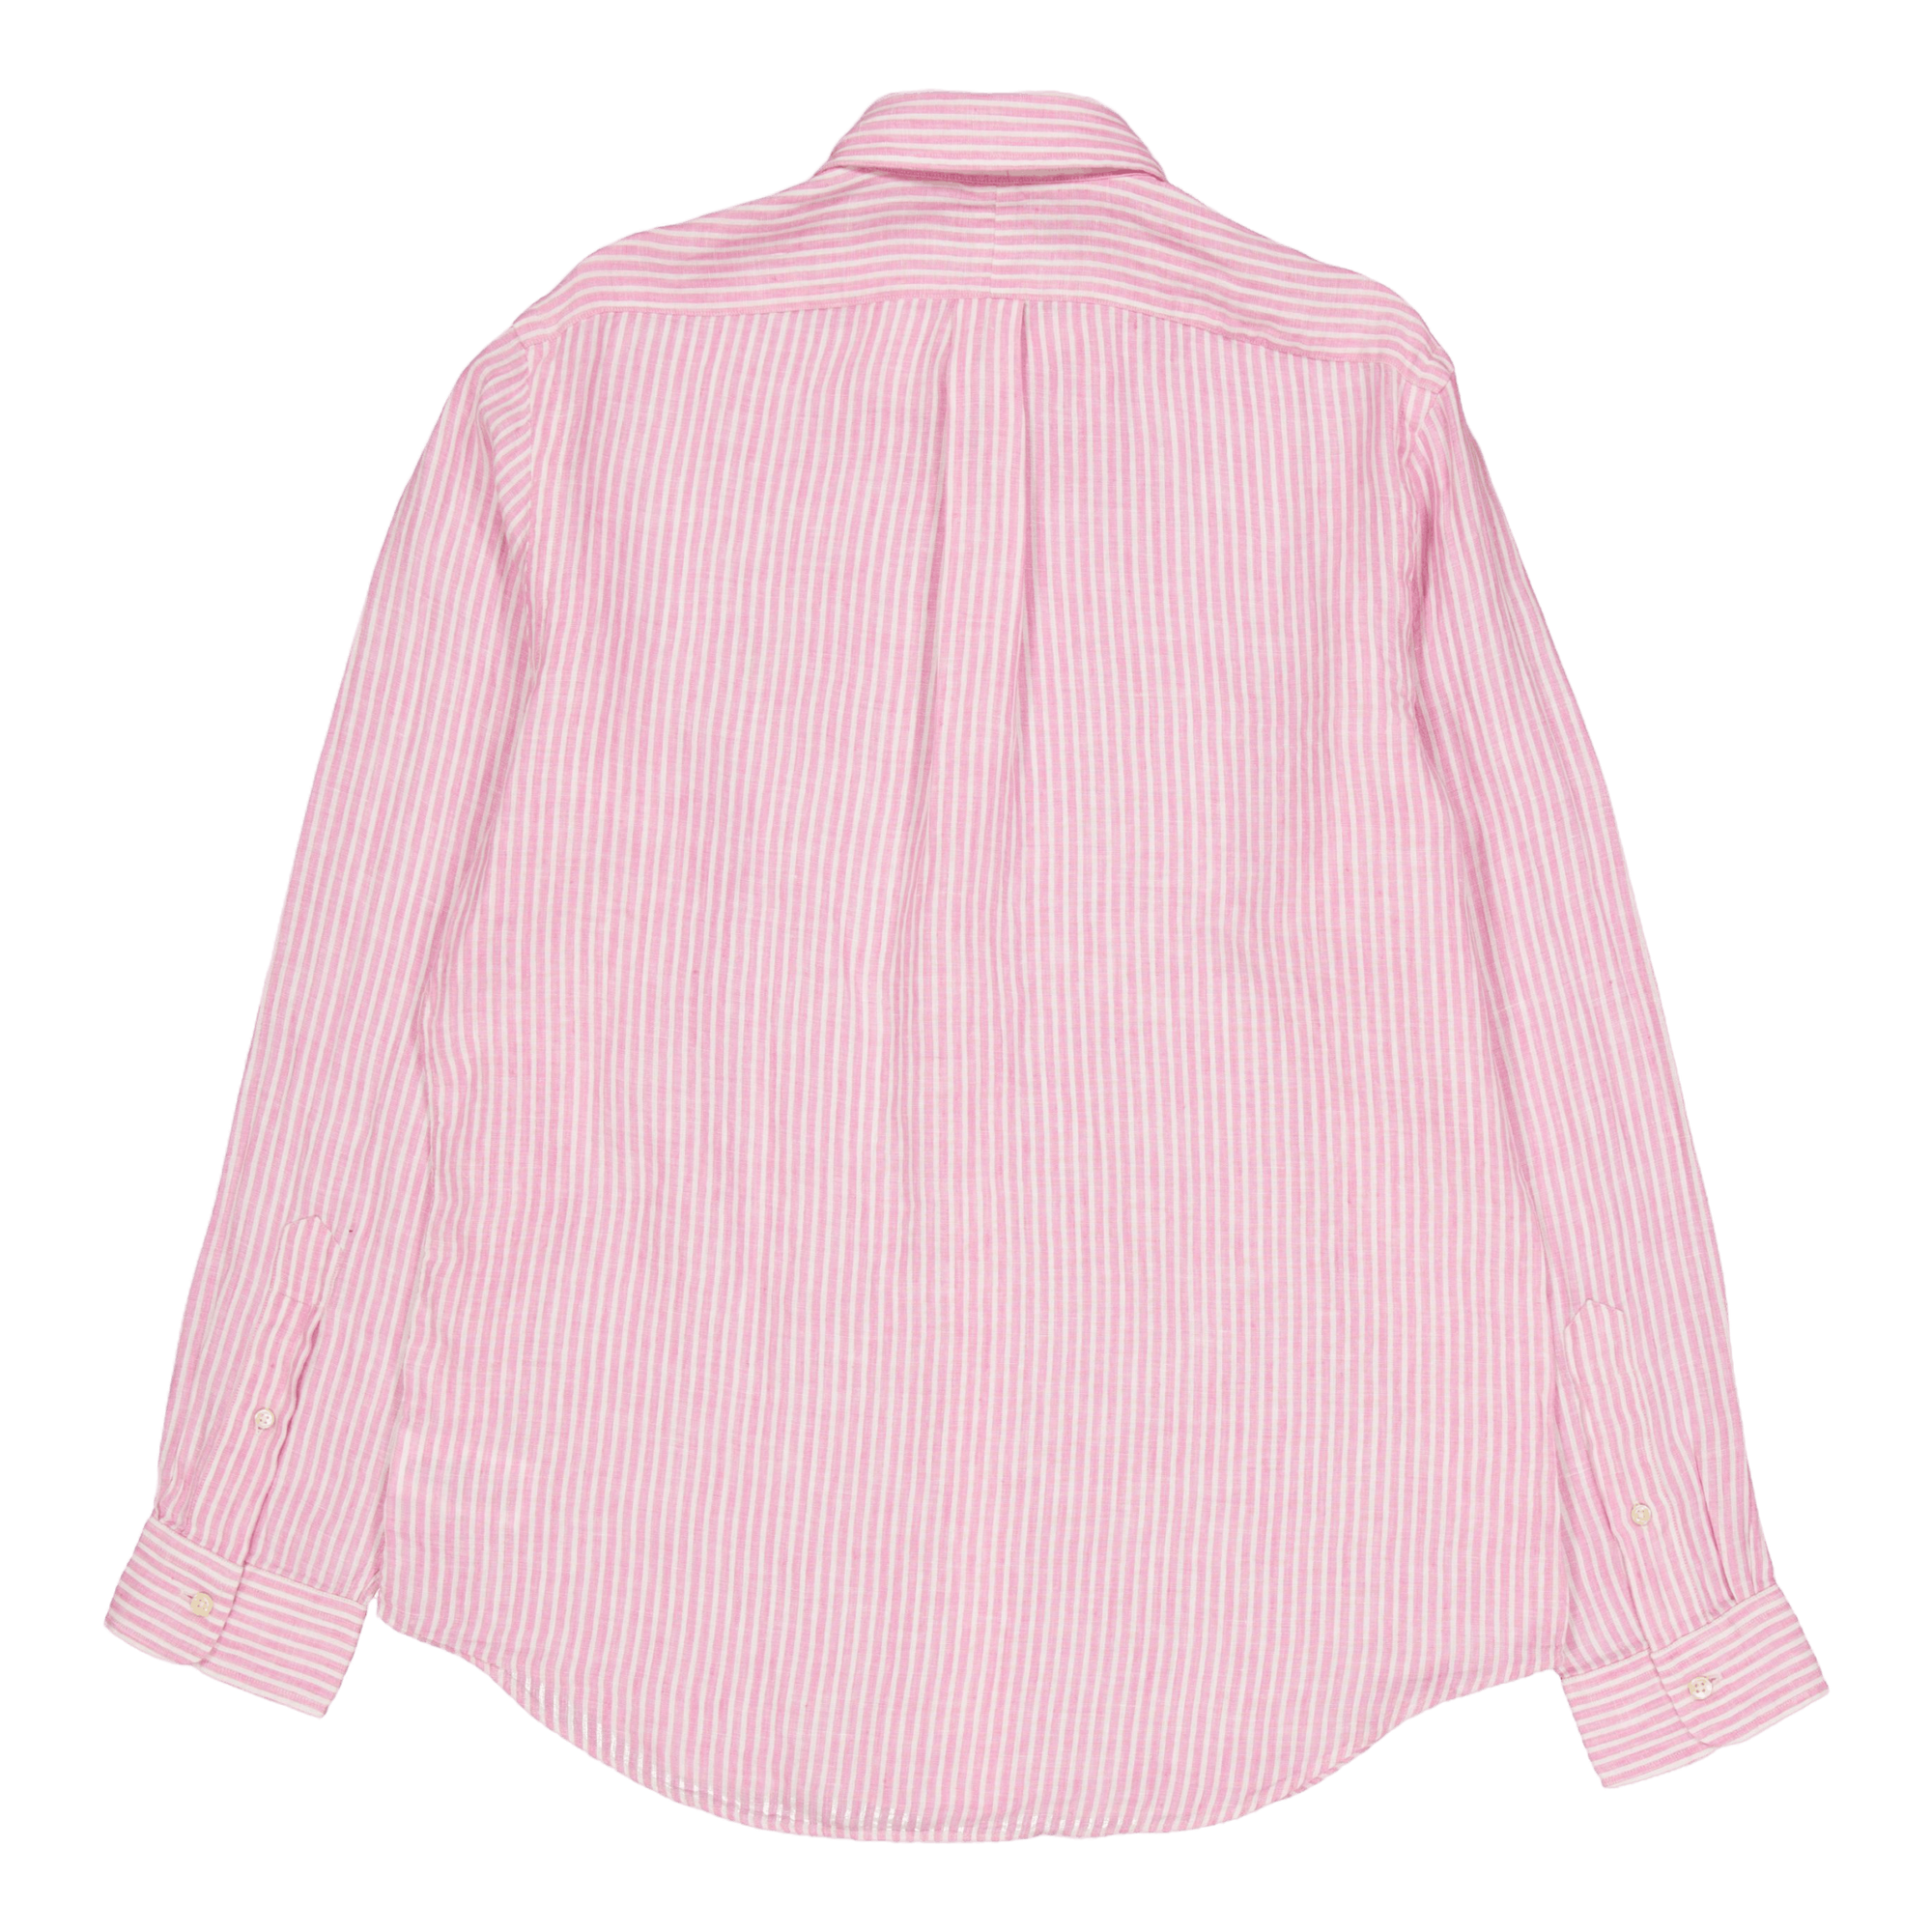 Classic Fit Striped Shirt Pink / White